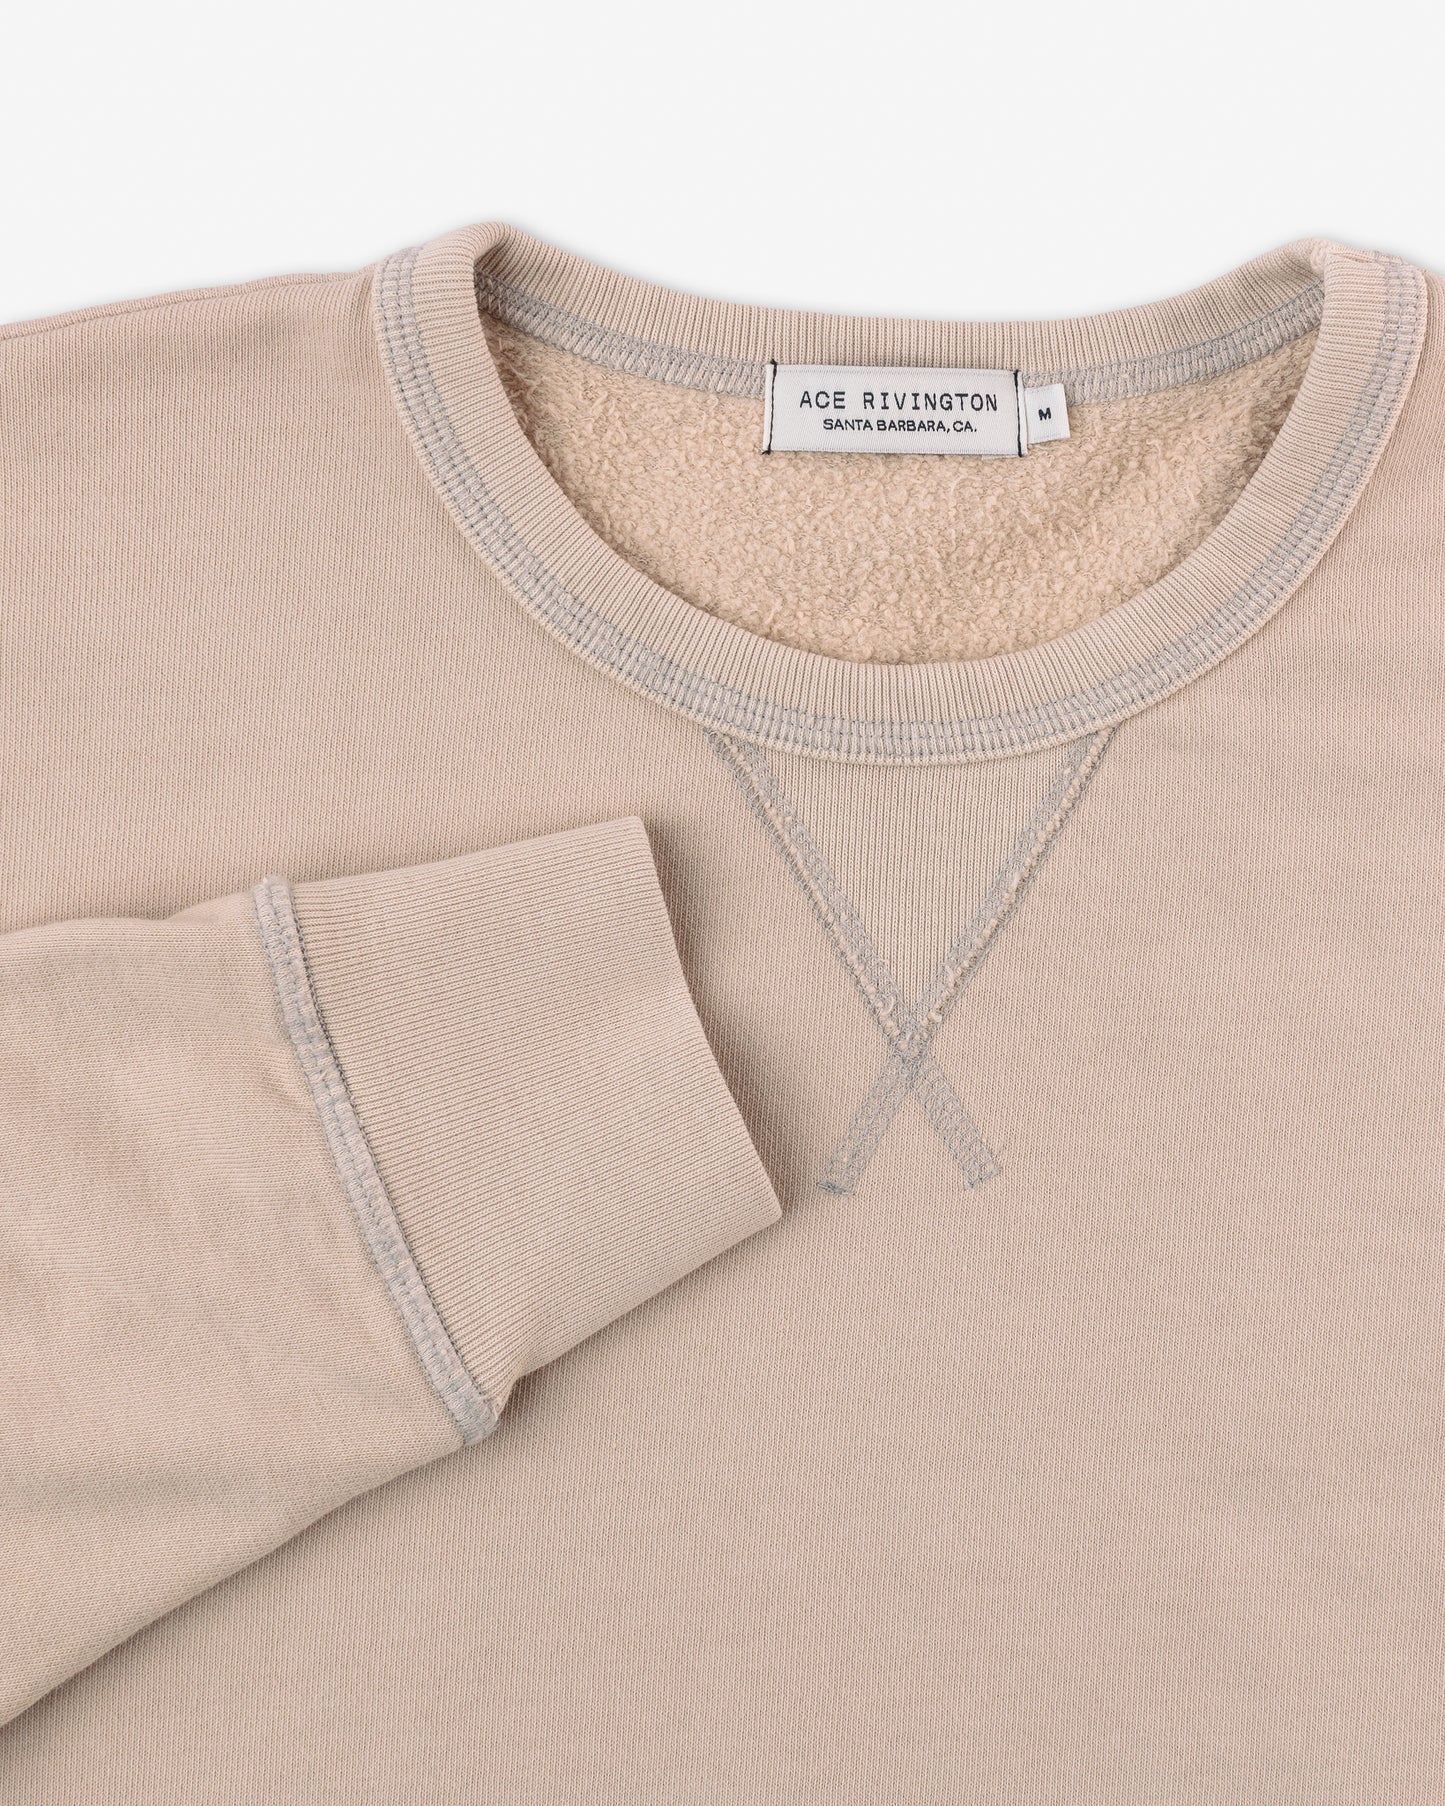 close up of cuff and collar on front of men's light beige khaki long sleeve sweatshirt made with organic cotton